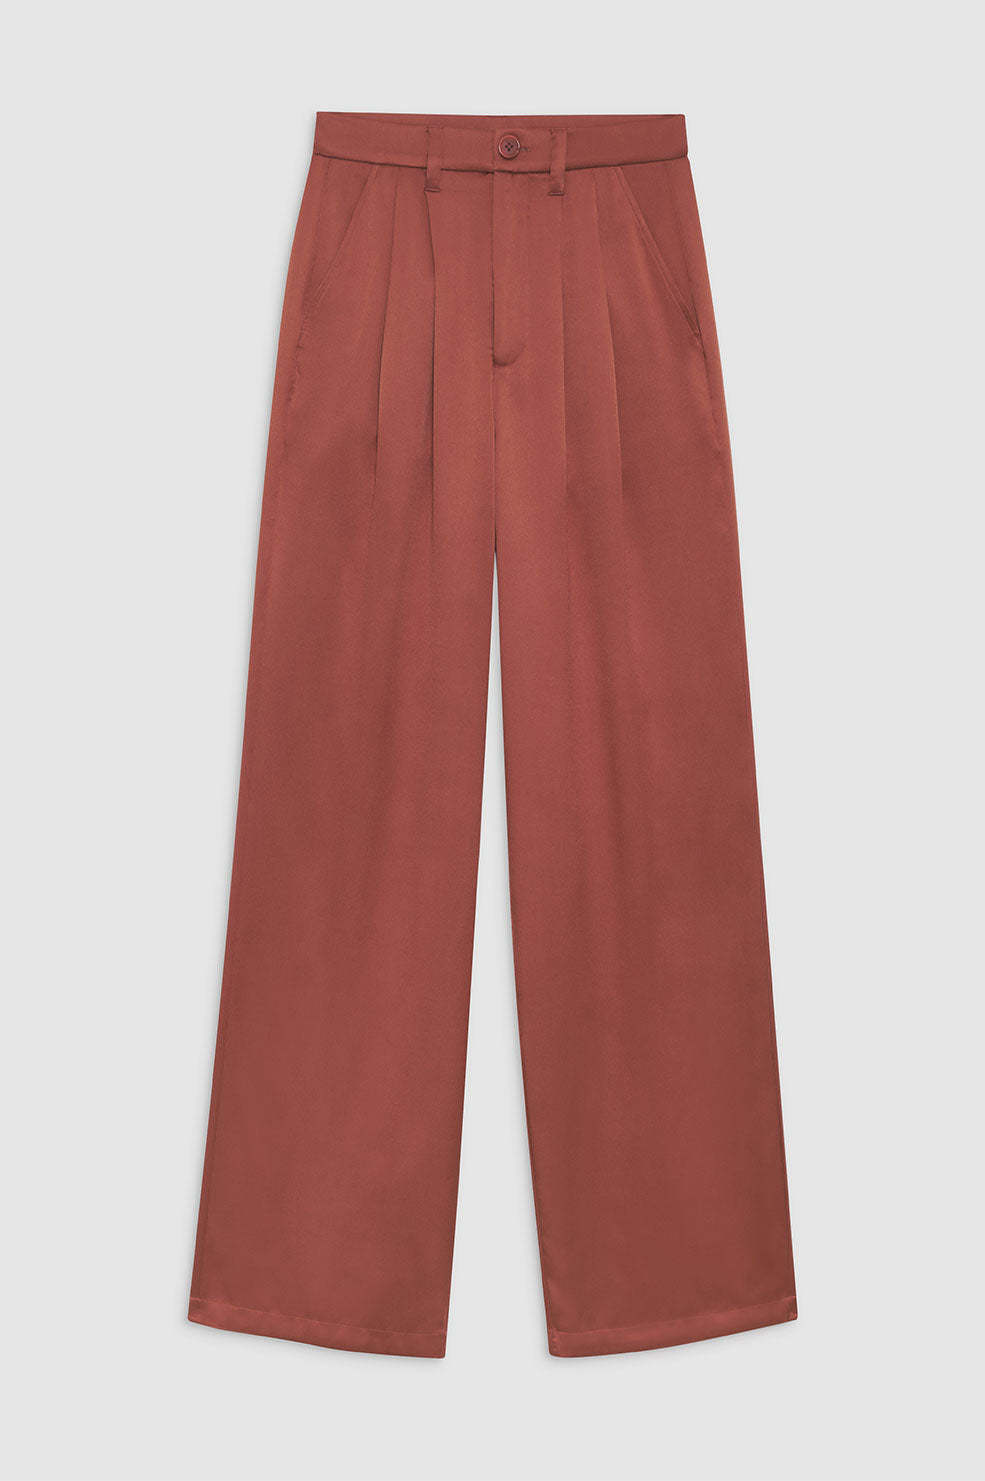 ANINE BING Carrie Pant - Terracotta Silk - Front View